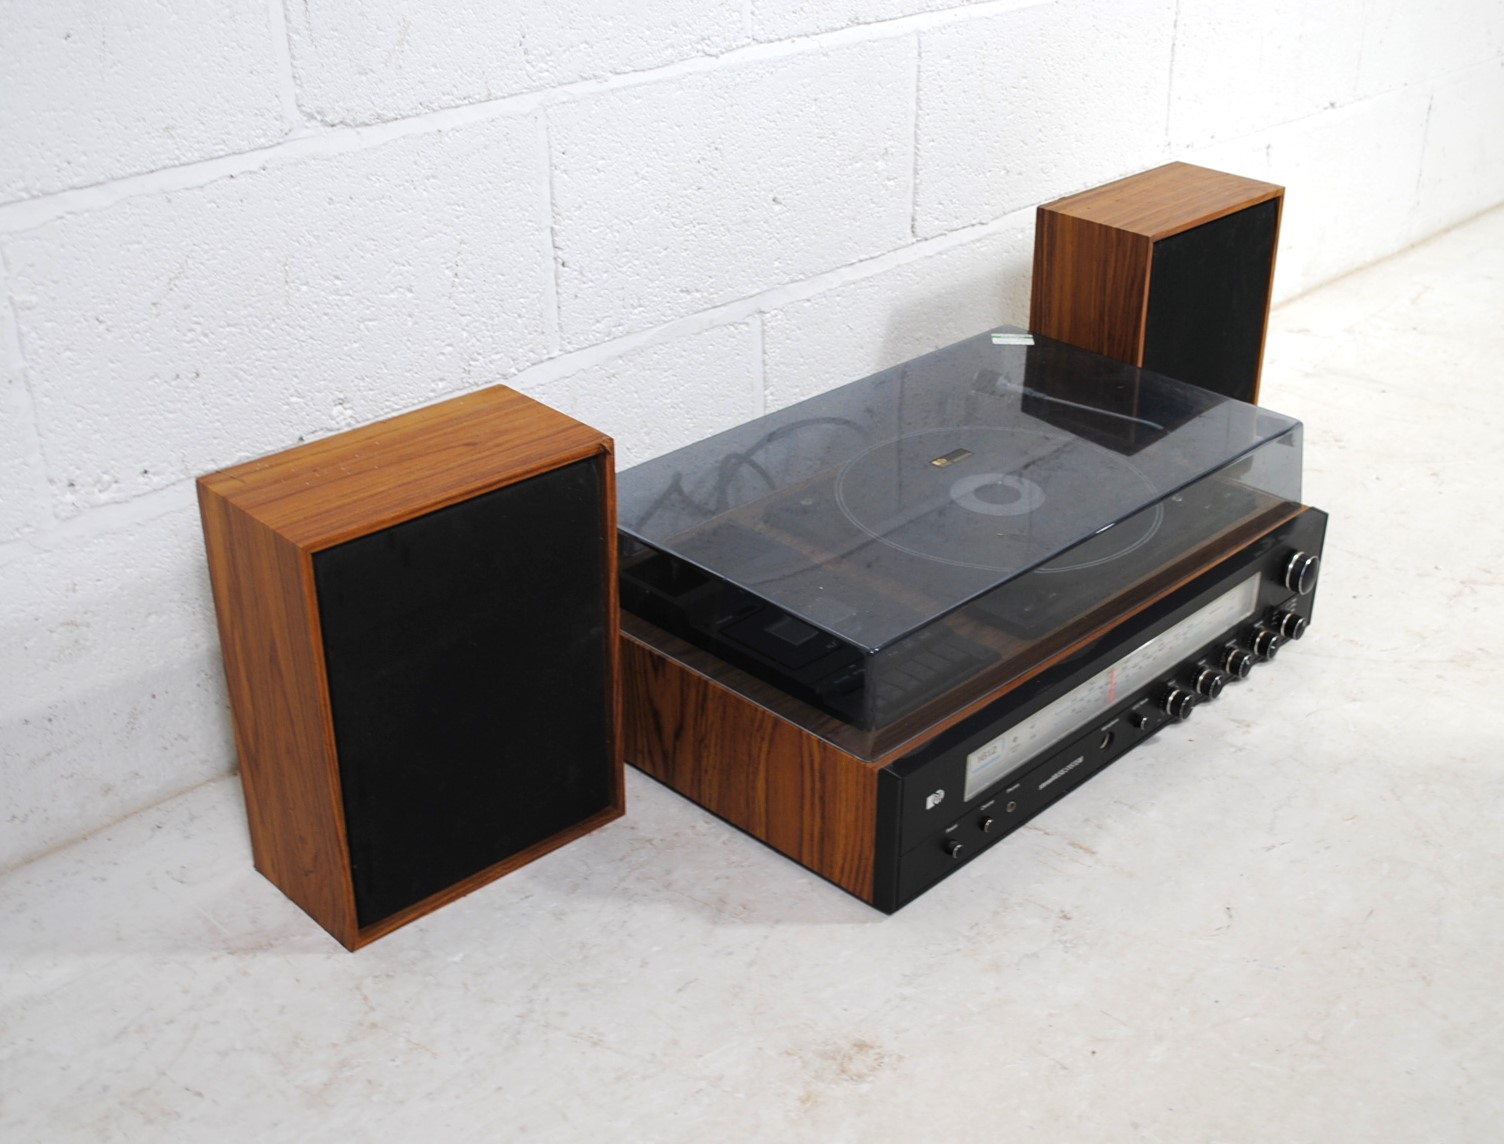 A vintage Pye 1612 stereo music system, including a pair of Pye 5780 8ohm bookshelf speakers - Image 4 of 11